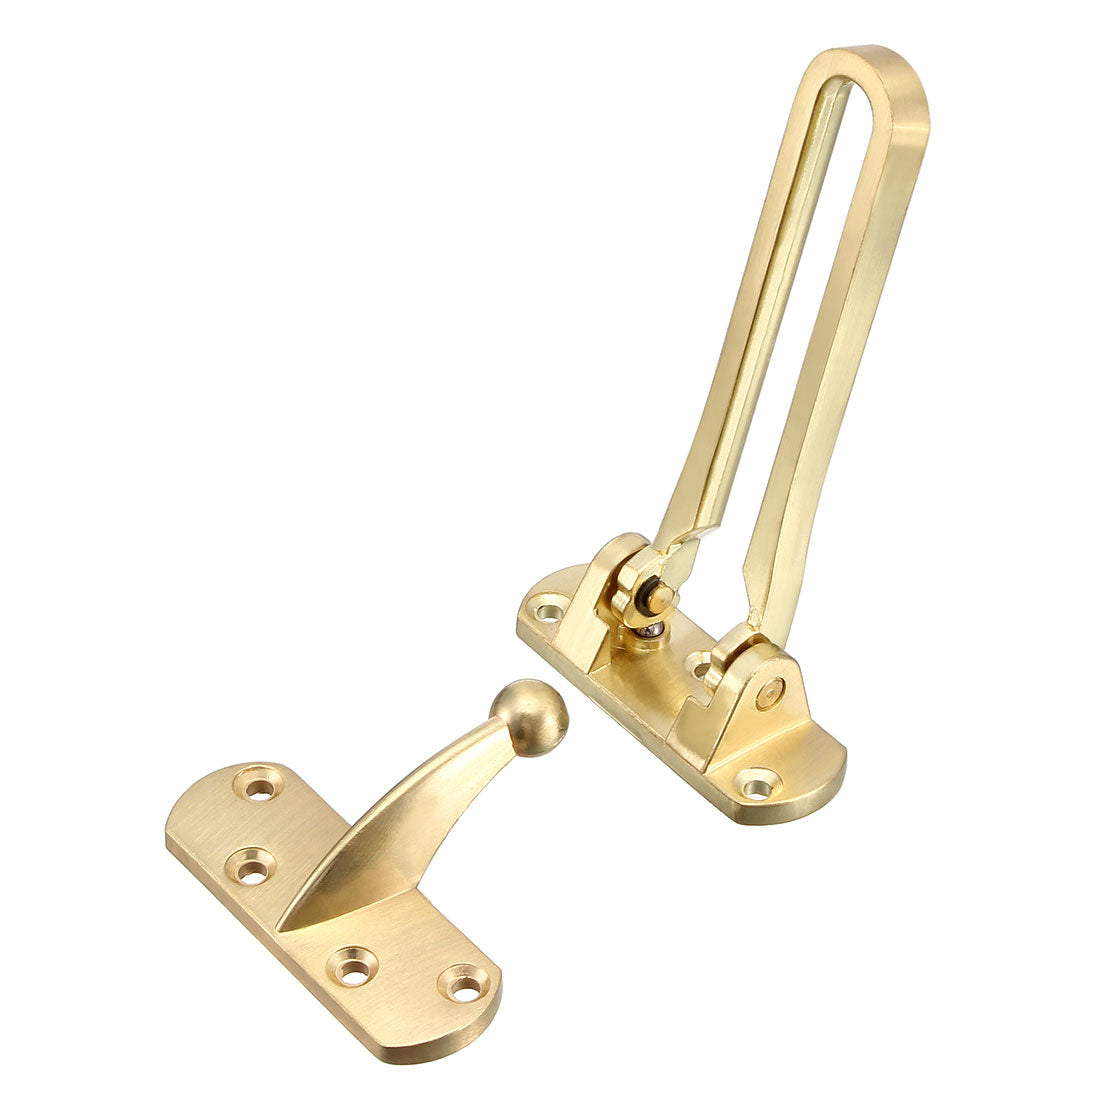 uxcell Uxcell Swing Bar Lock for Hinged Swing Secondary Security Lock for Door and Home Security, 4.13" Bar Length, Golden, Zinc Alloy, 2pcs